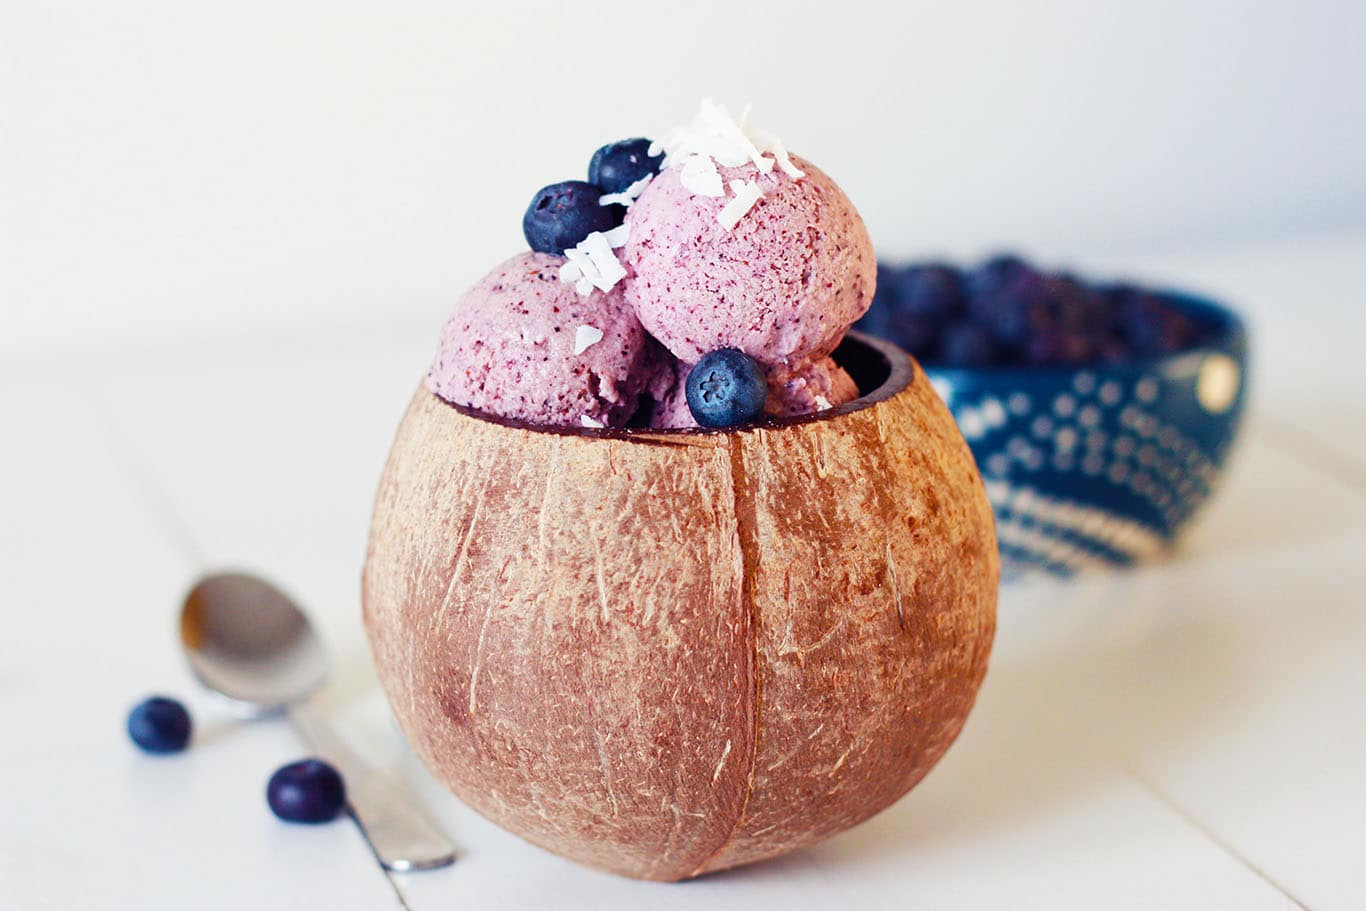 Blueberry Coconut Icecream in a coconut bowl with berries in the background